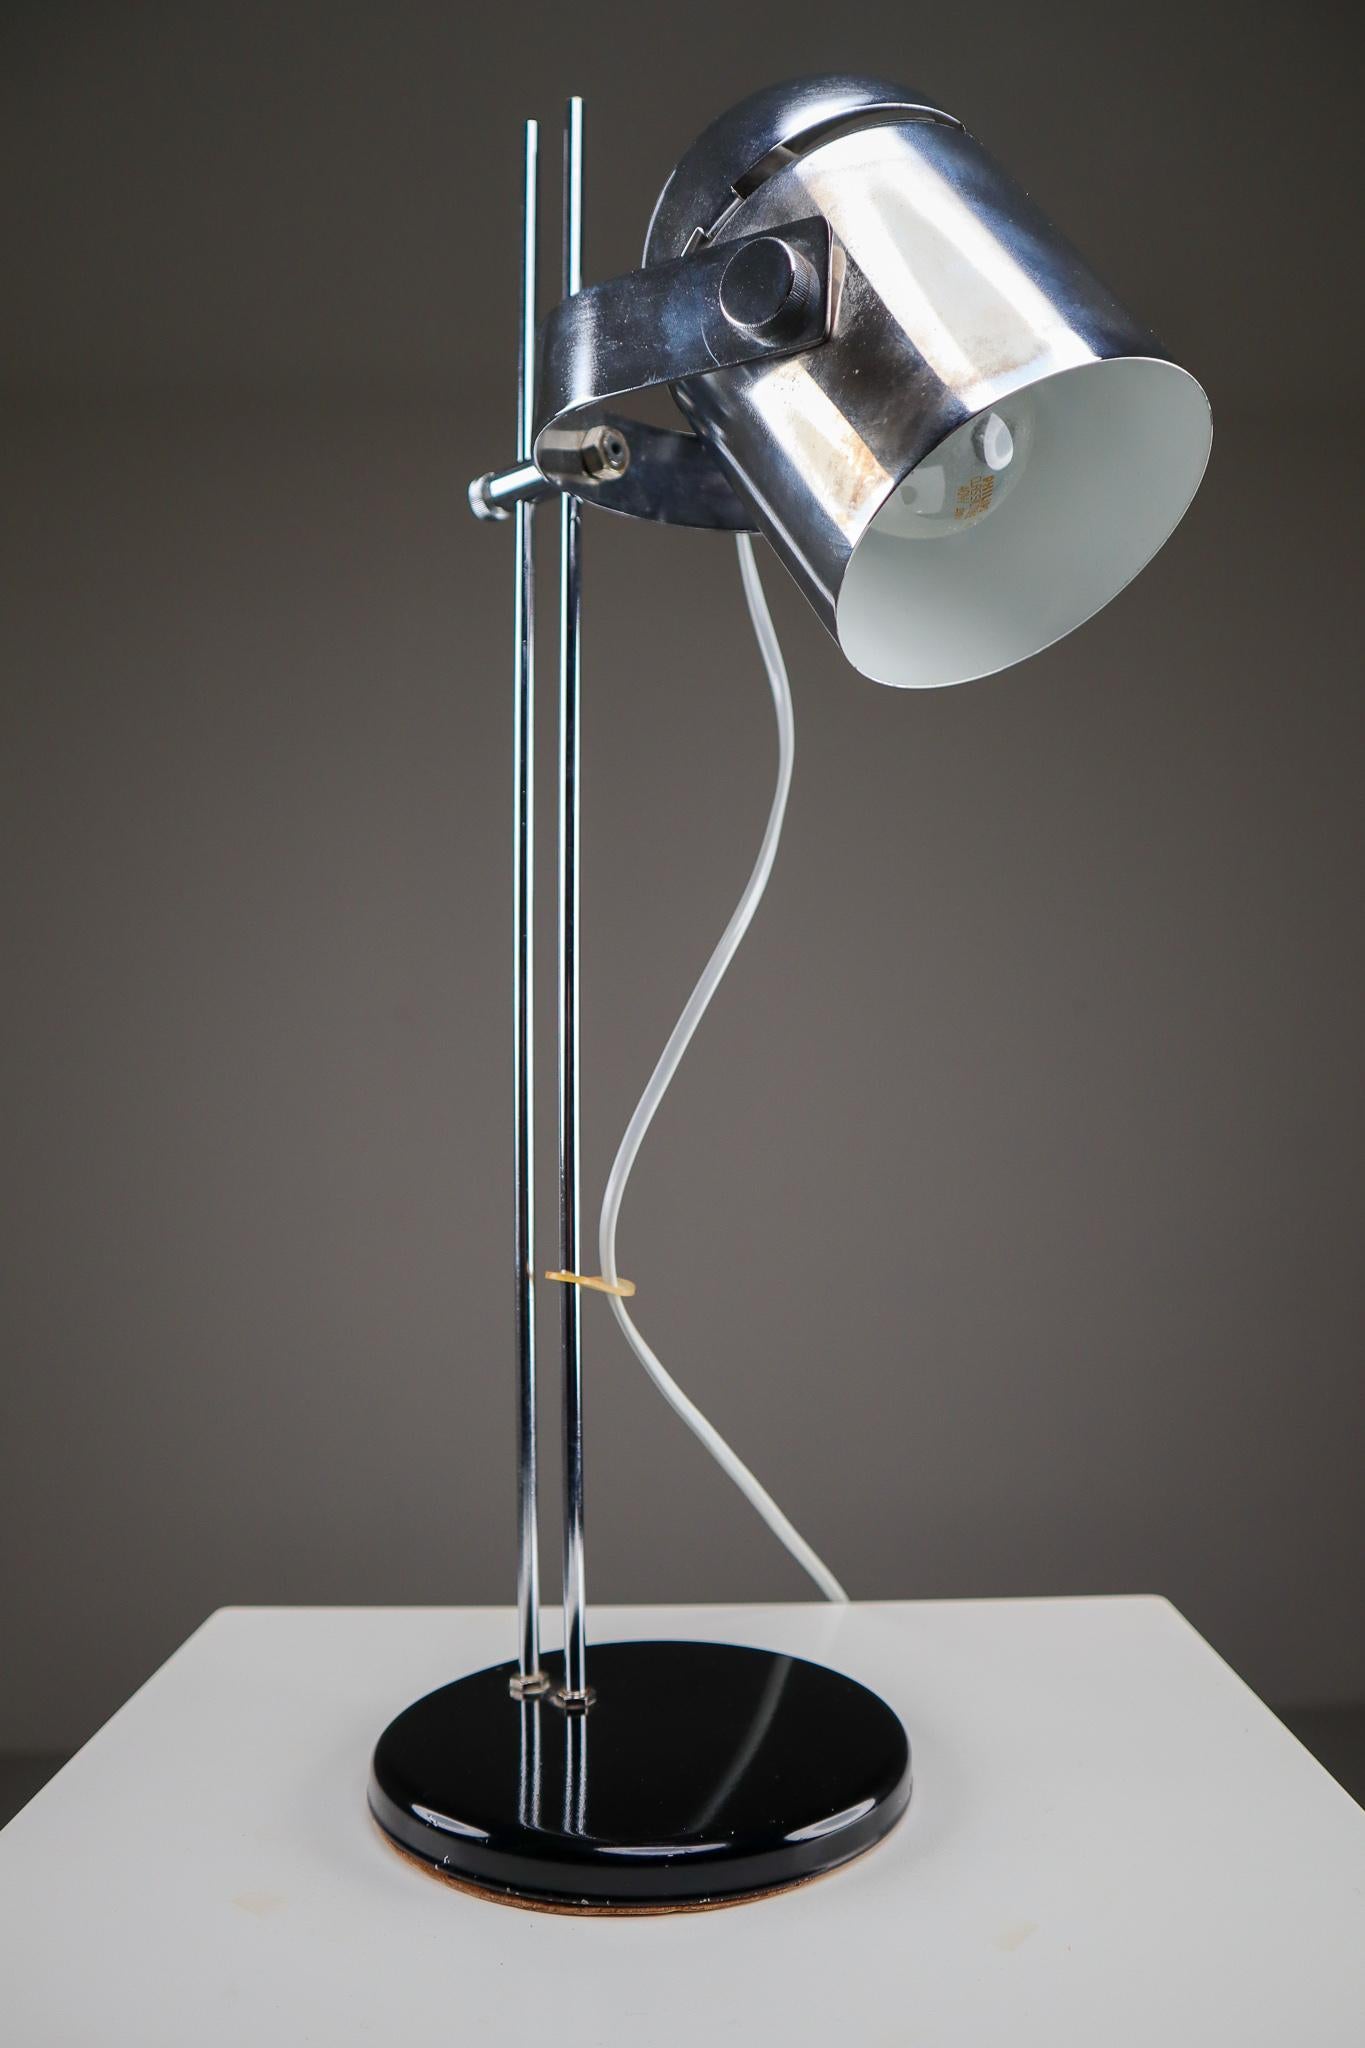 A German adjustable height desk lamp, with cylindrical polish steel shade on a chromed metal post with circular black metal base. The shade can be moved up and down the post to the desired height and the shade can be easily angled to a wide range of